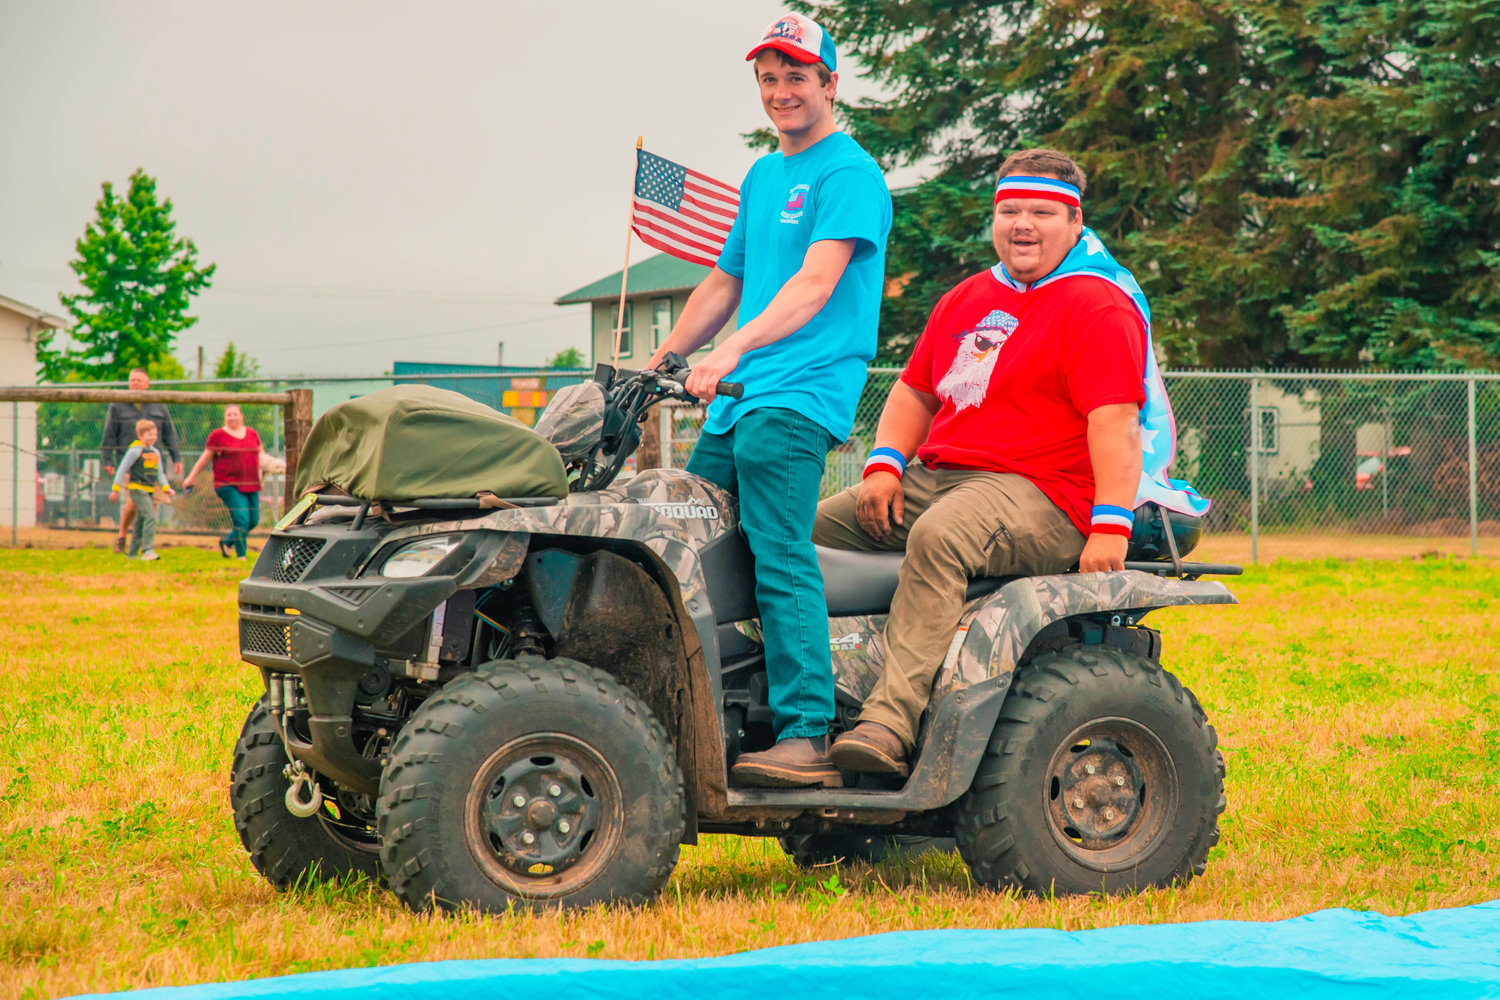 Volunteers drive through Klickitat Prairie Park on a quad while sporting red, white and blue attire Saturday in Mossyrock.